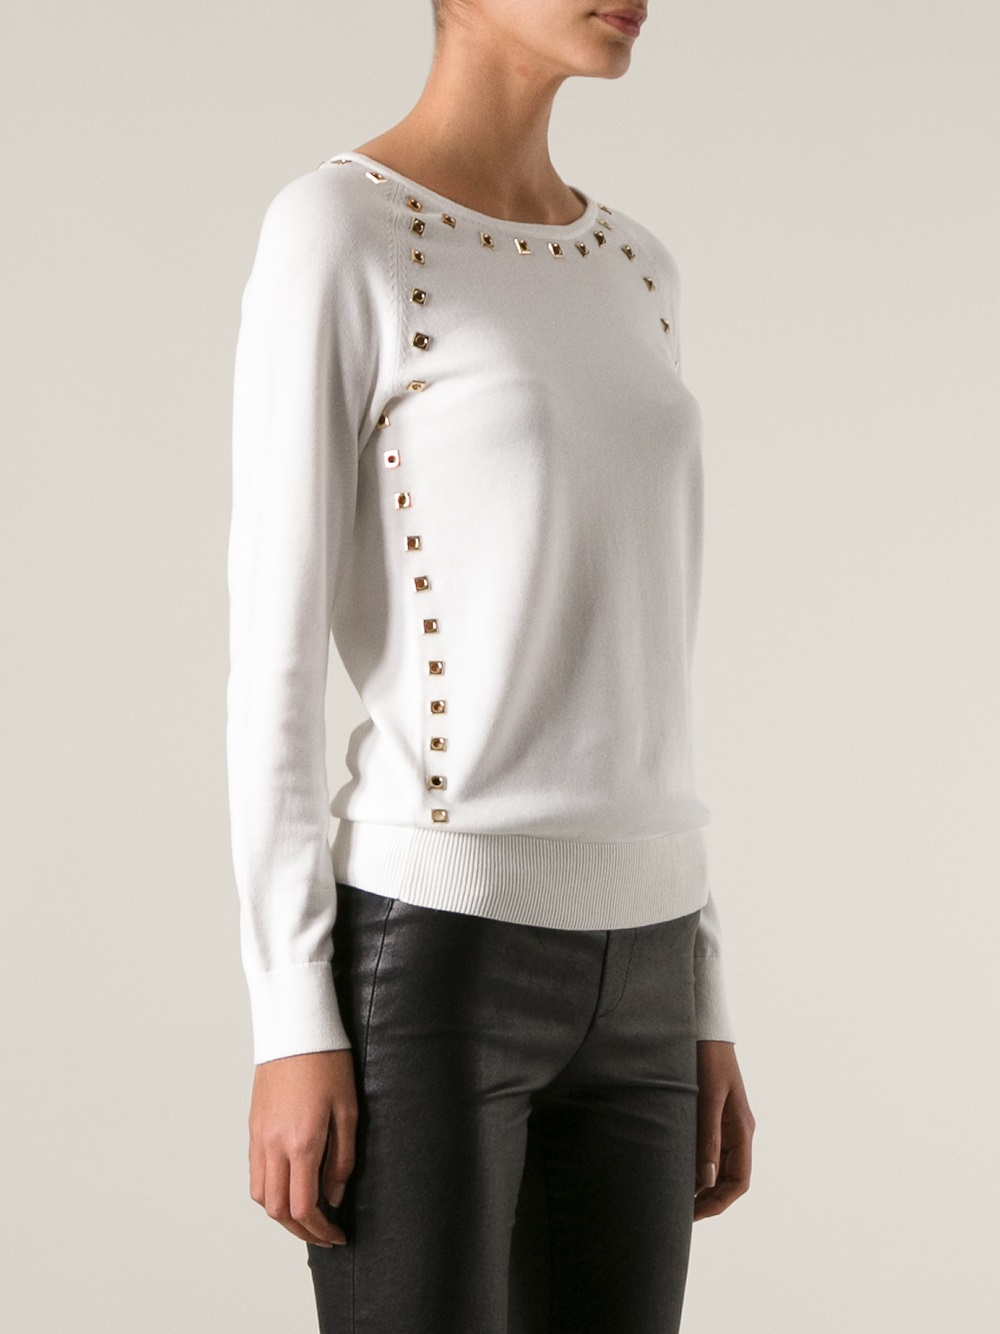 Lyst - Michael Michael Kors Studded Sweater in White